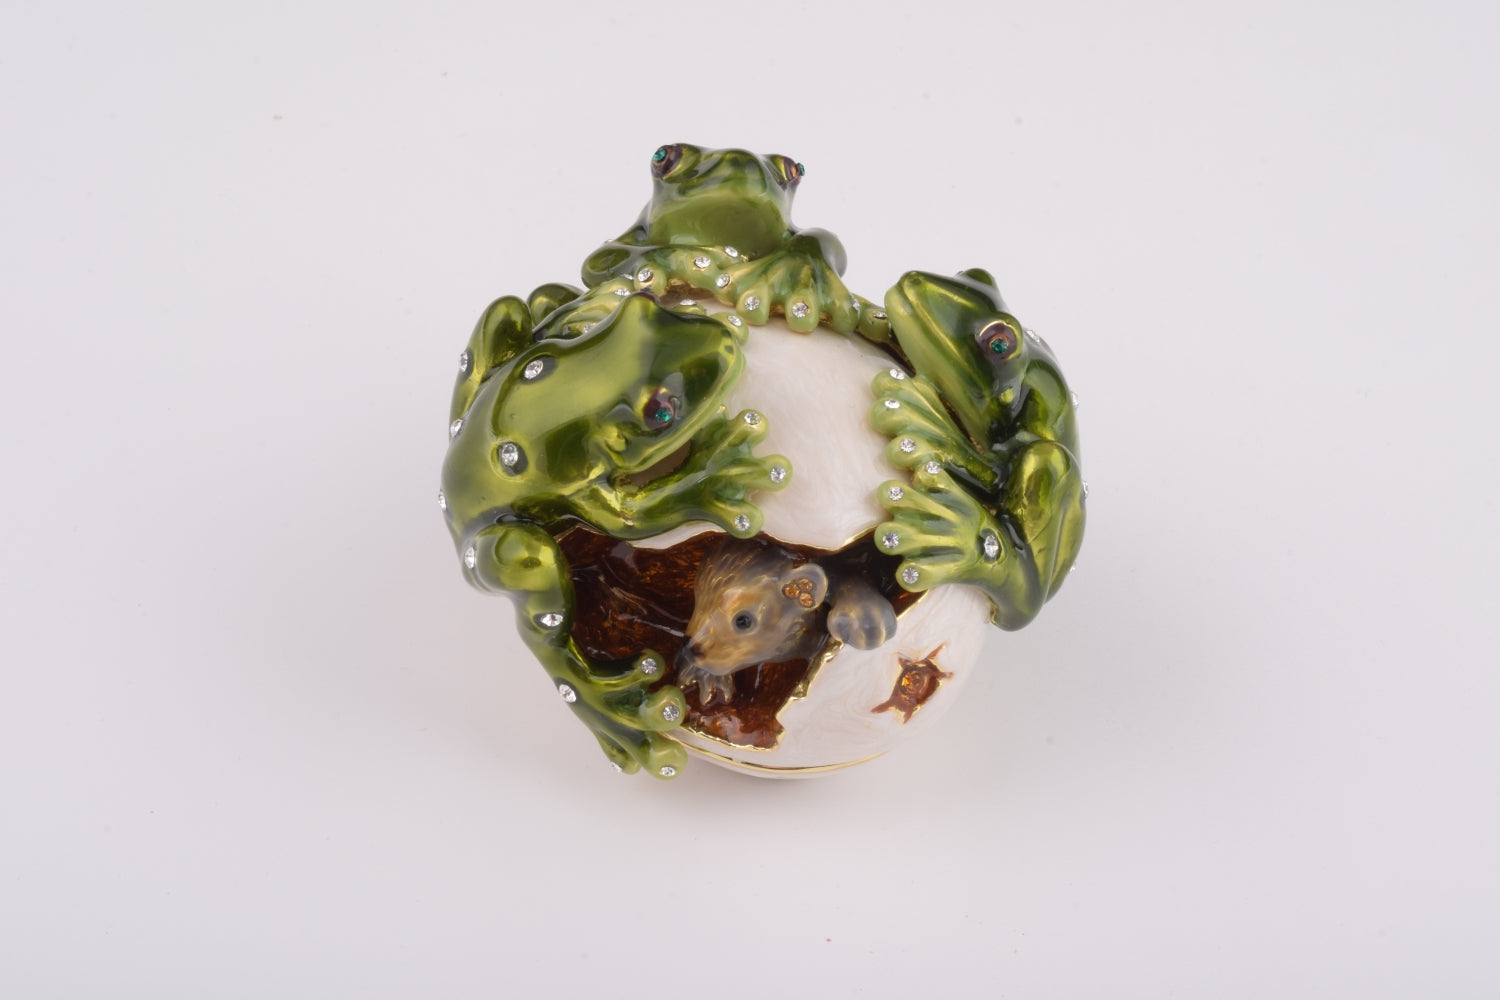 Frogs on white Egg including hidden mouse